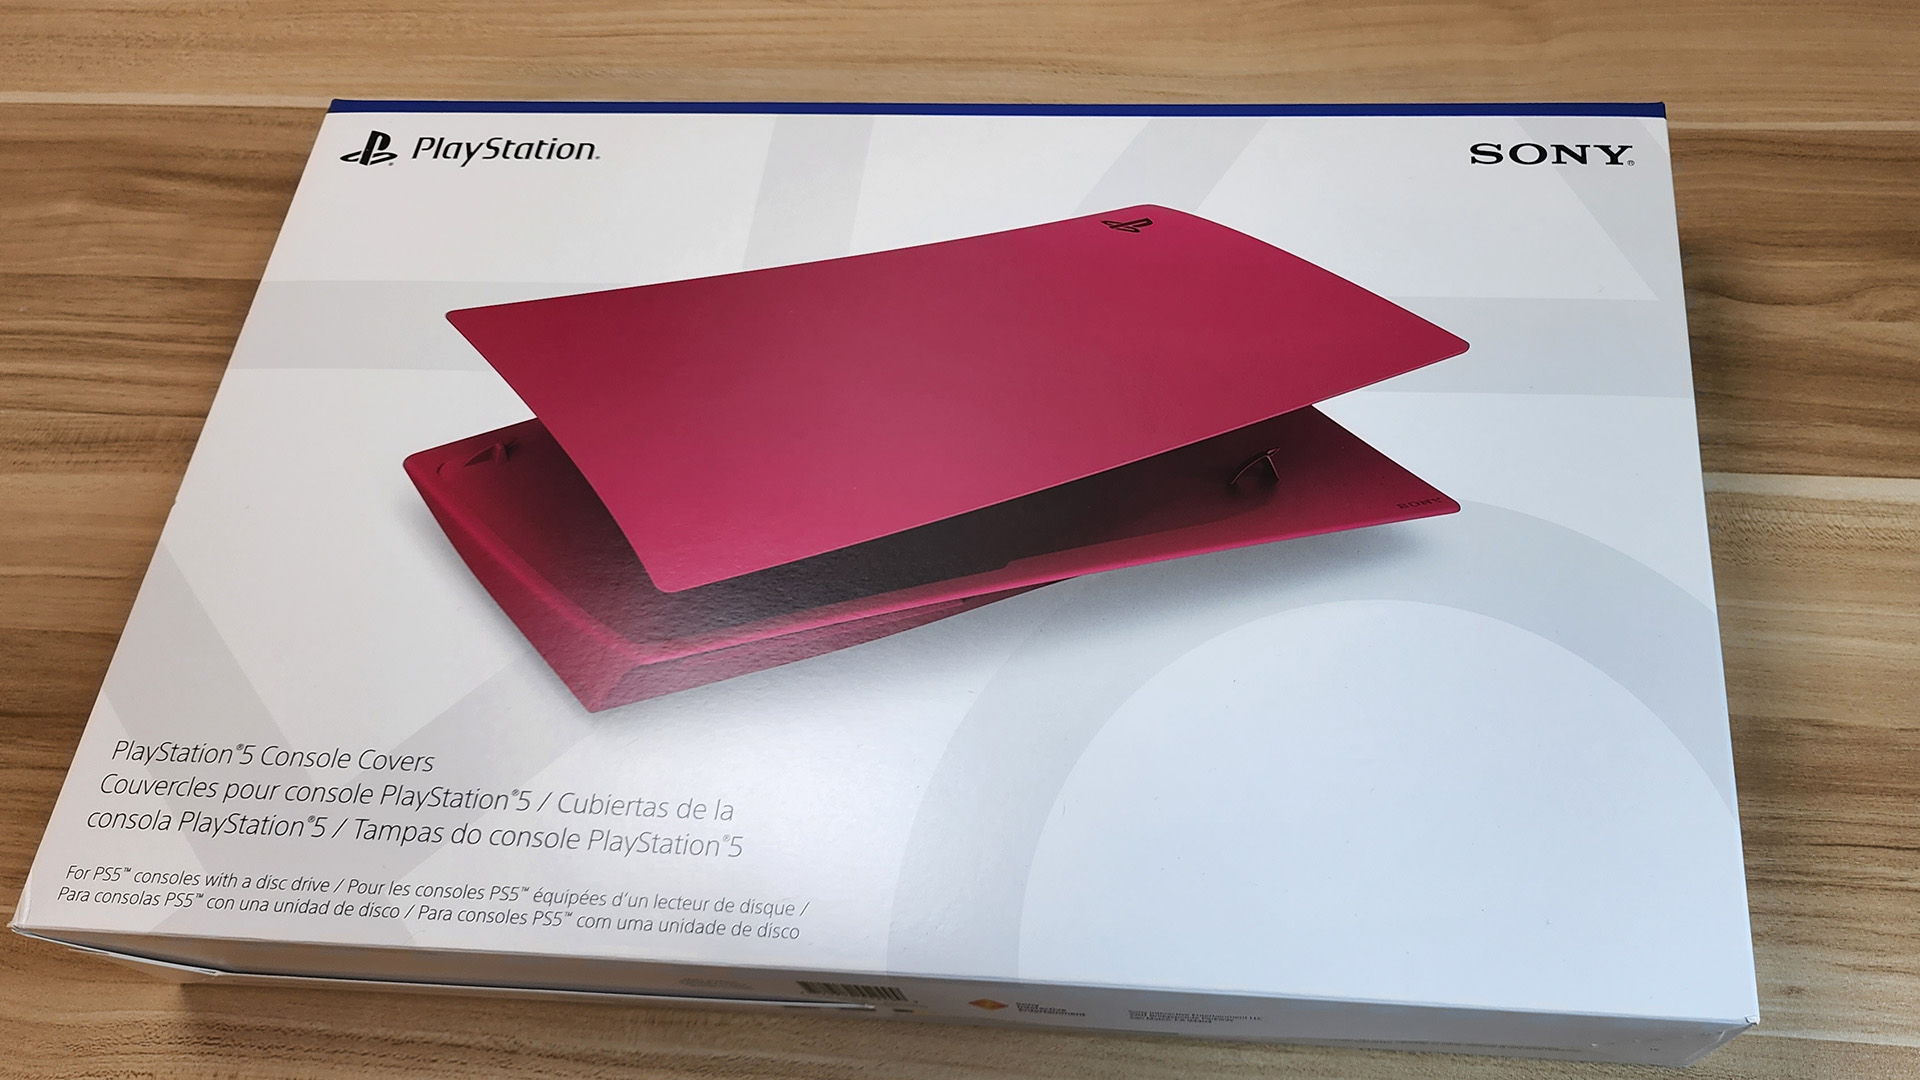 https://www.digitaltrends.com/wp-content/uploads/2022/05/new-ps5-cover-box.jpg?fit=720%2C720&p=1